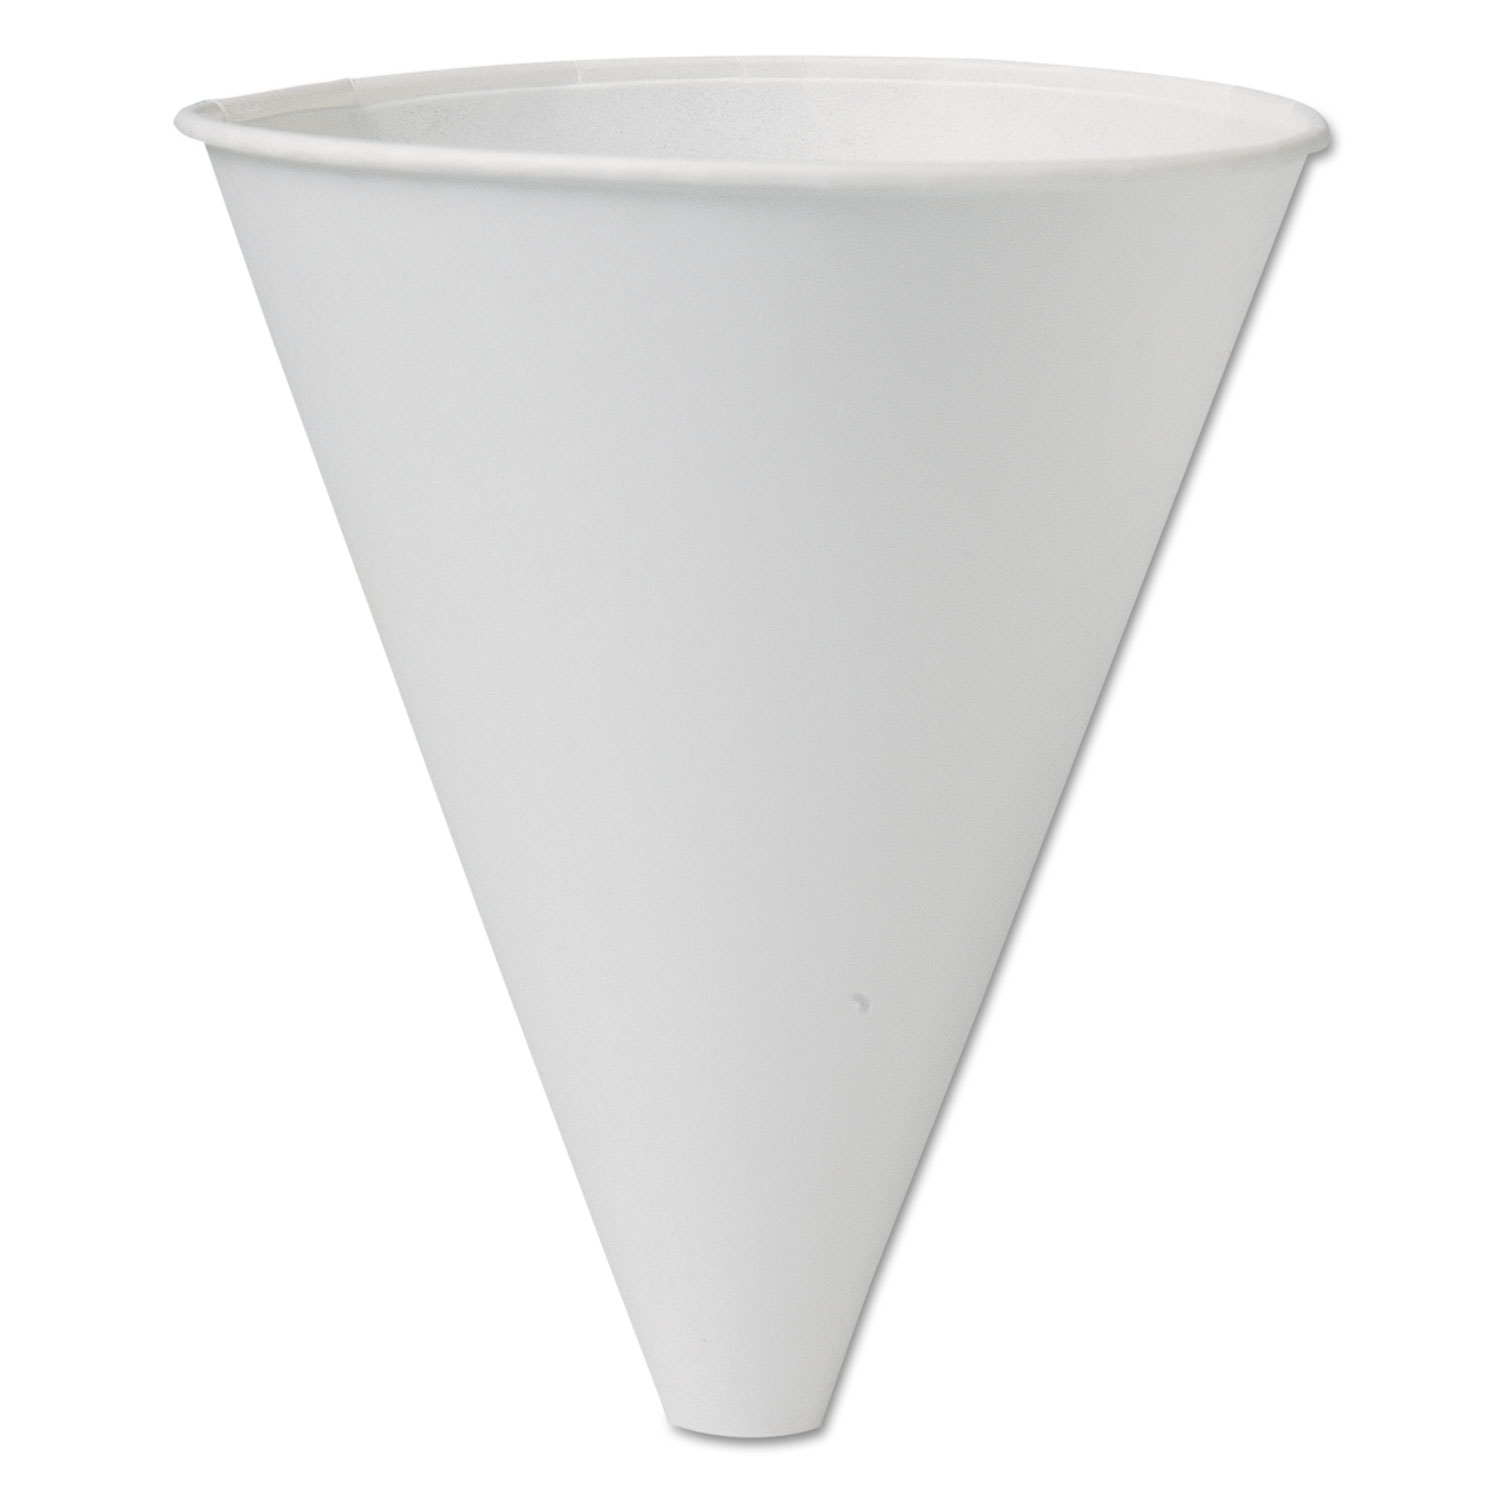  Dart 10BFC-2050 Bare Eco-Forward Treated Paper Funnel Cups, 10oz. White, 250/Bag, 4 Bags/Carton (SCC10BFC) 